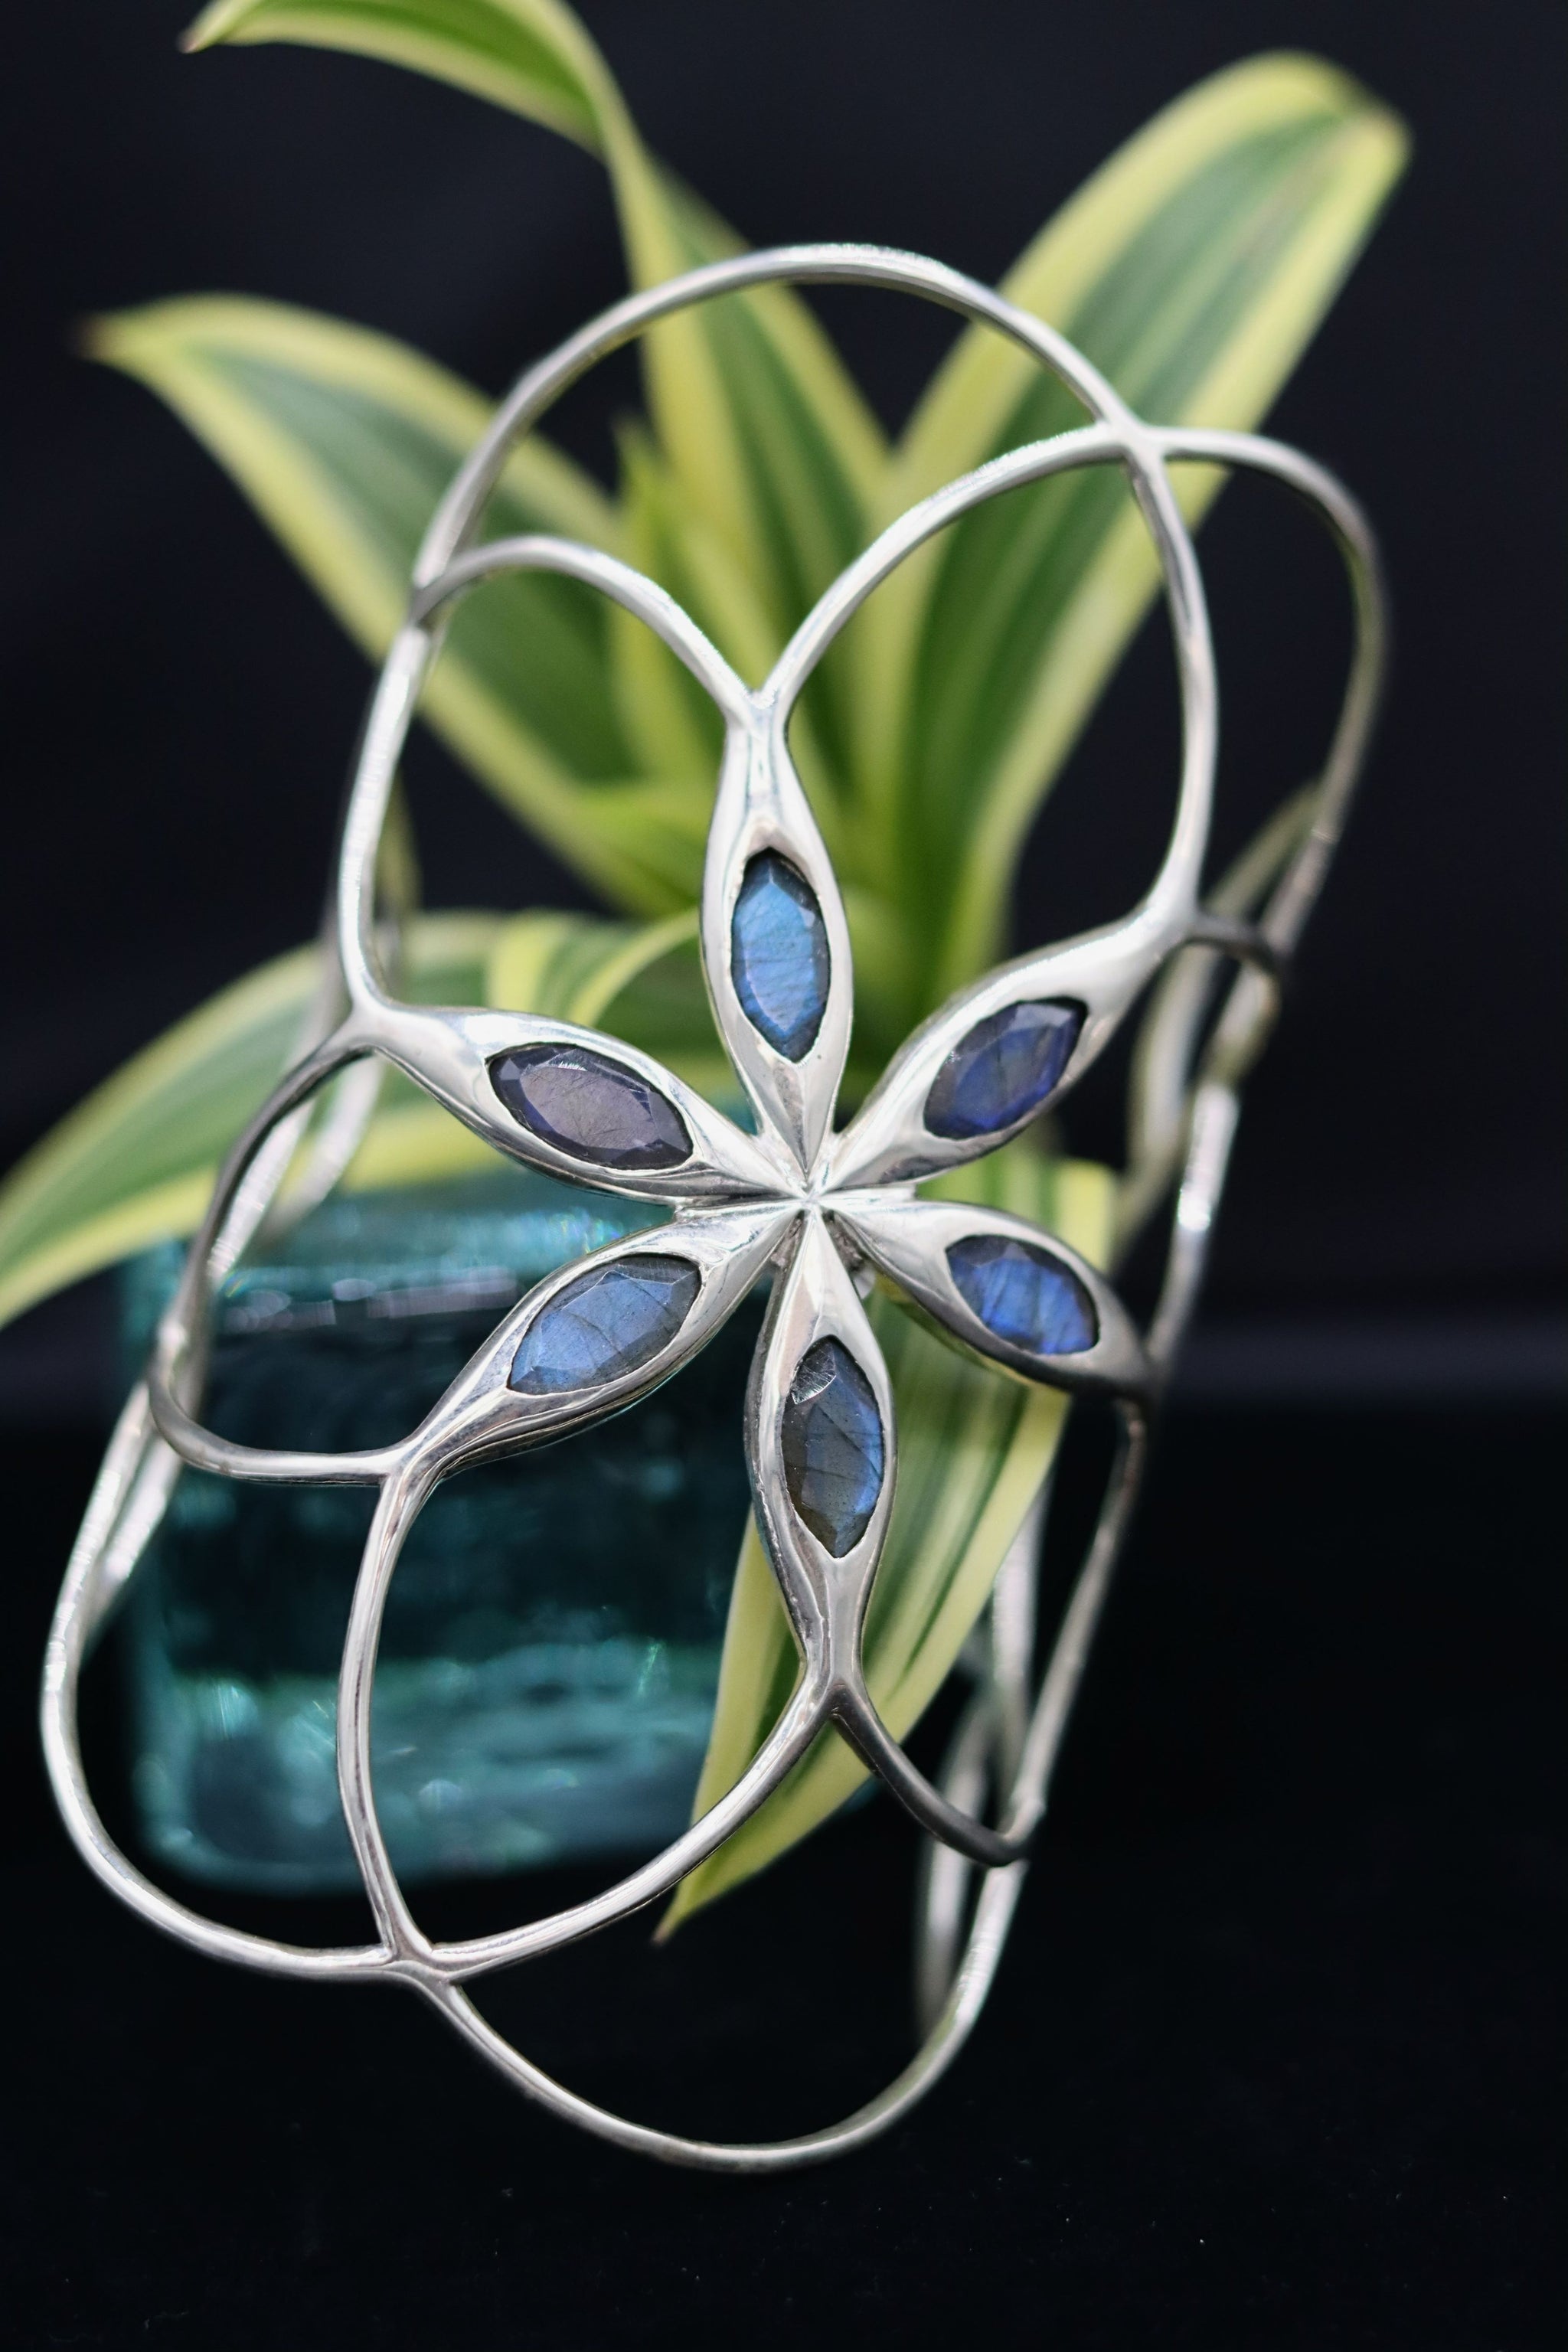 Bracelet - Cuff Sterling Silver Woven 3 Line Lauhala Collection